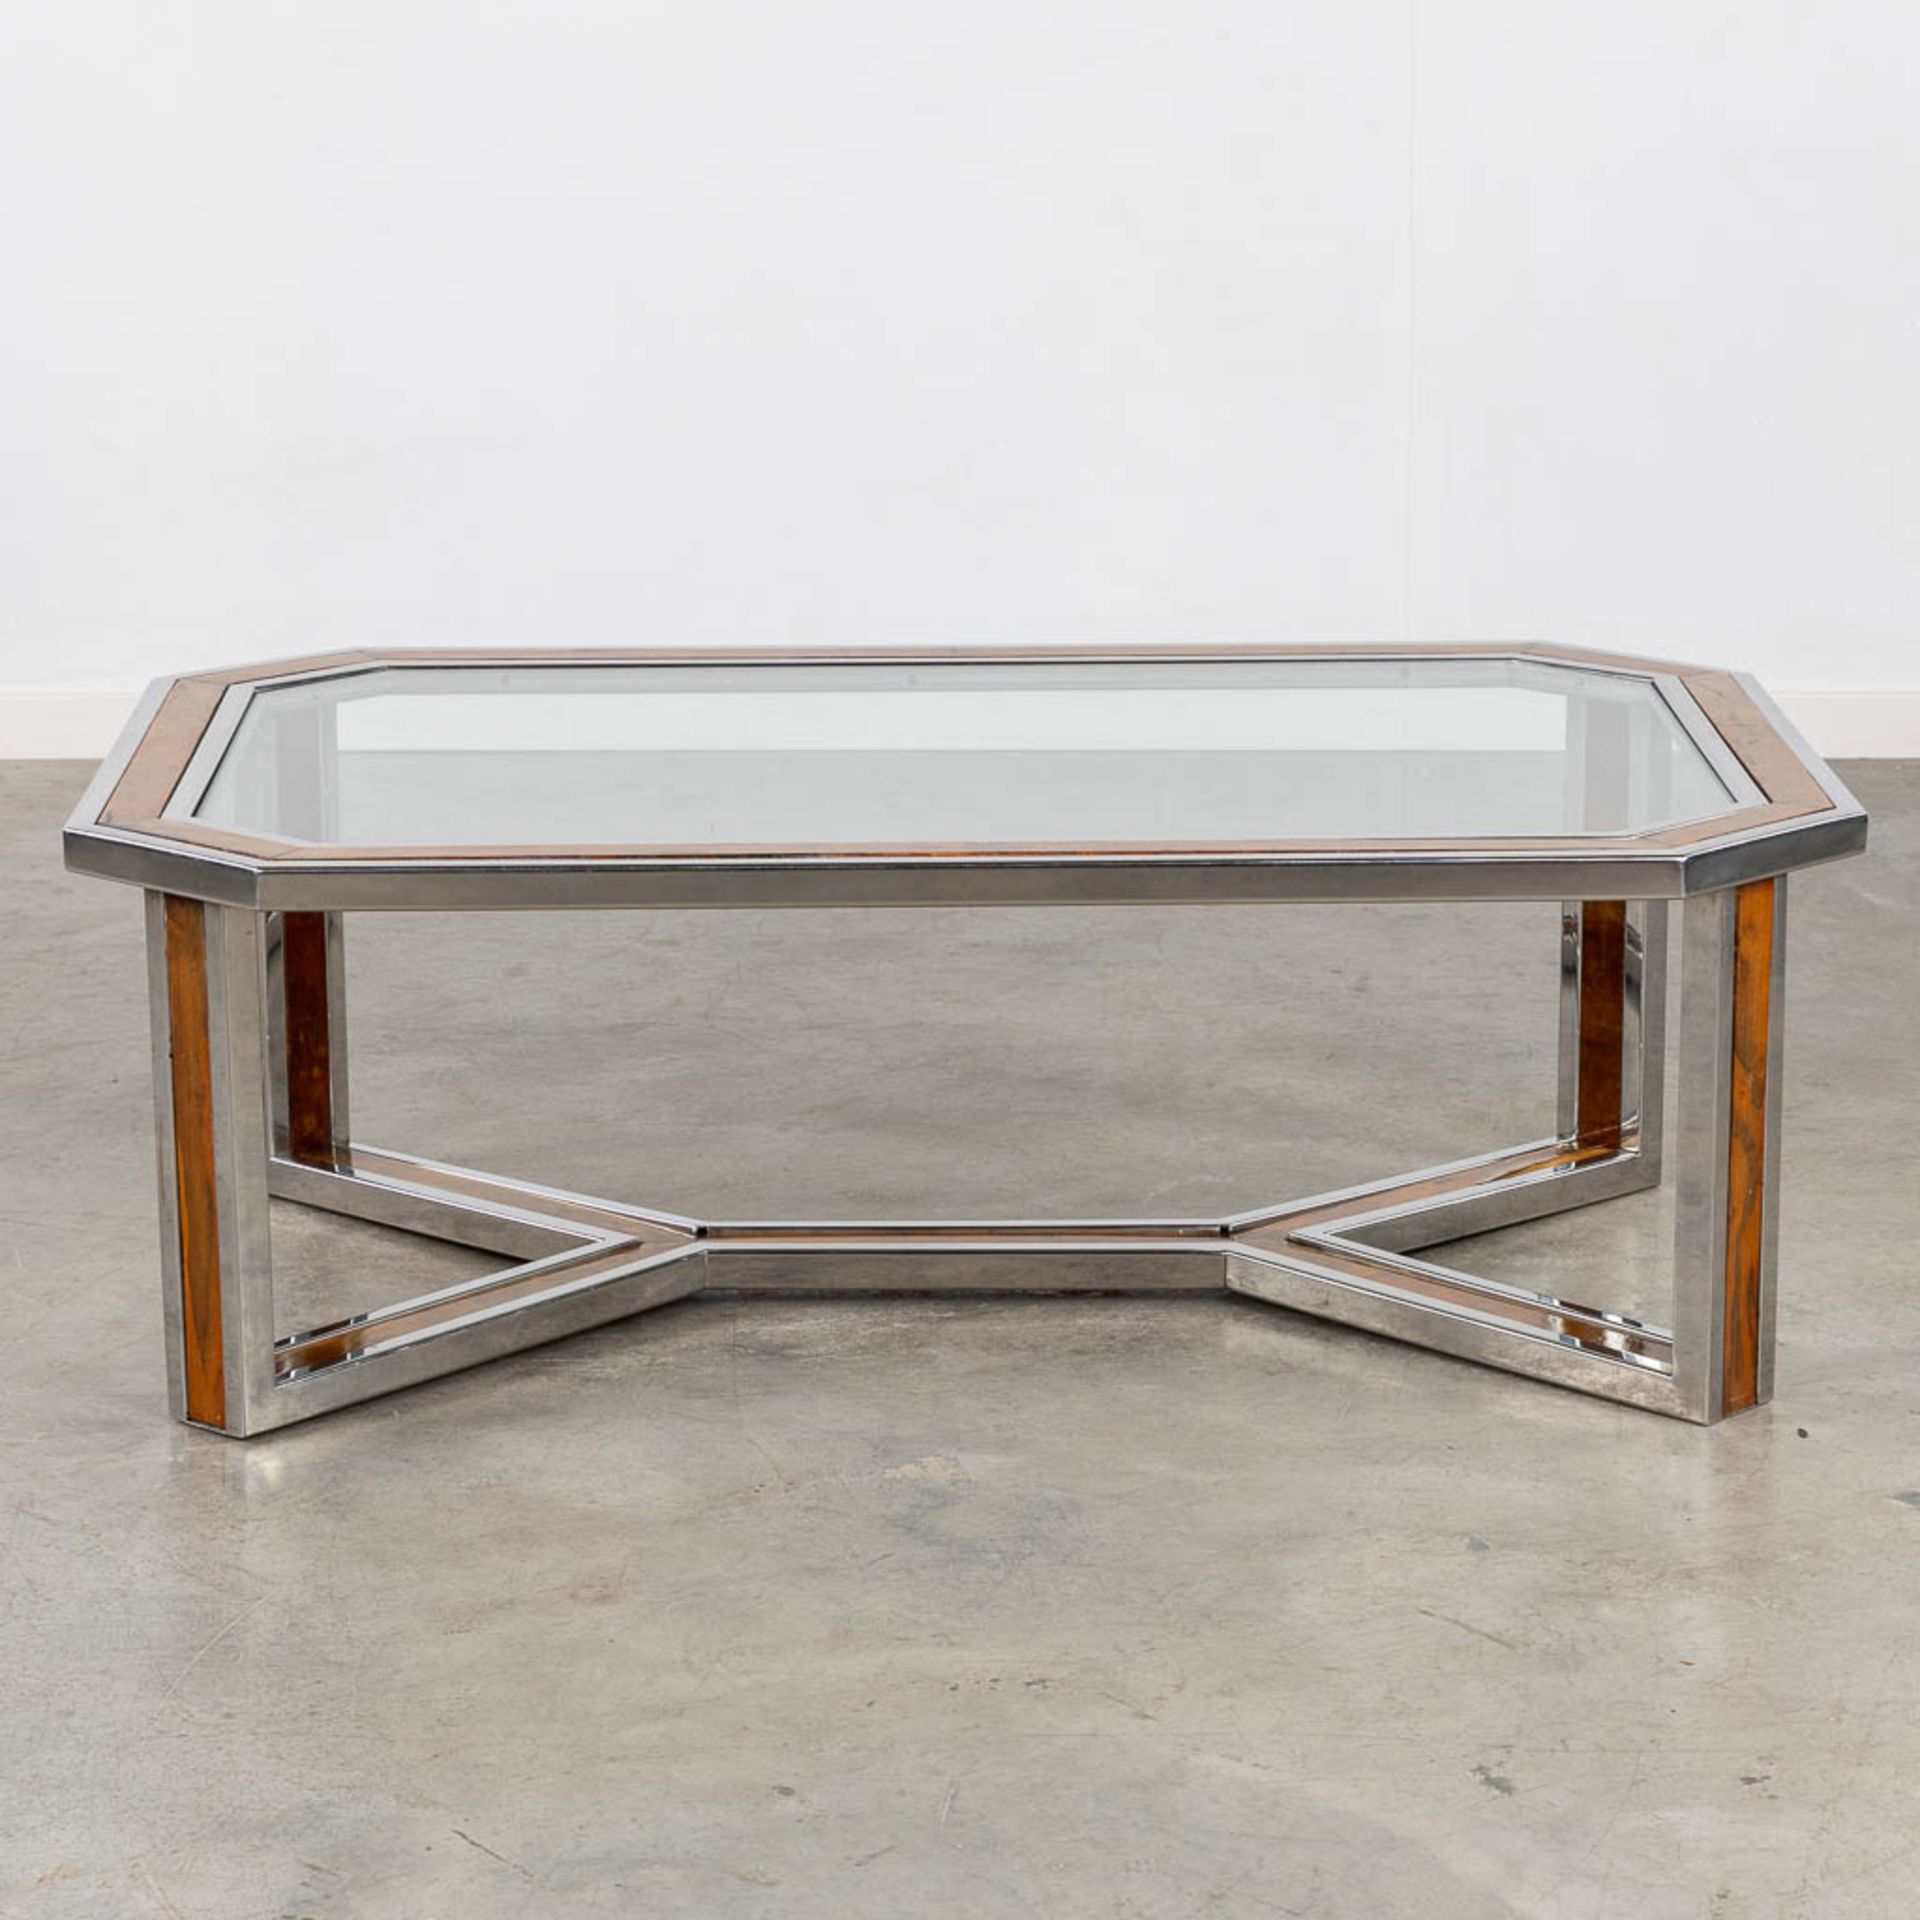 A coffee table, chrome with a faux wood inlay and a glass top. (L:80 x W:120 x H:40 cm) - Bild 5 aus 10